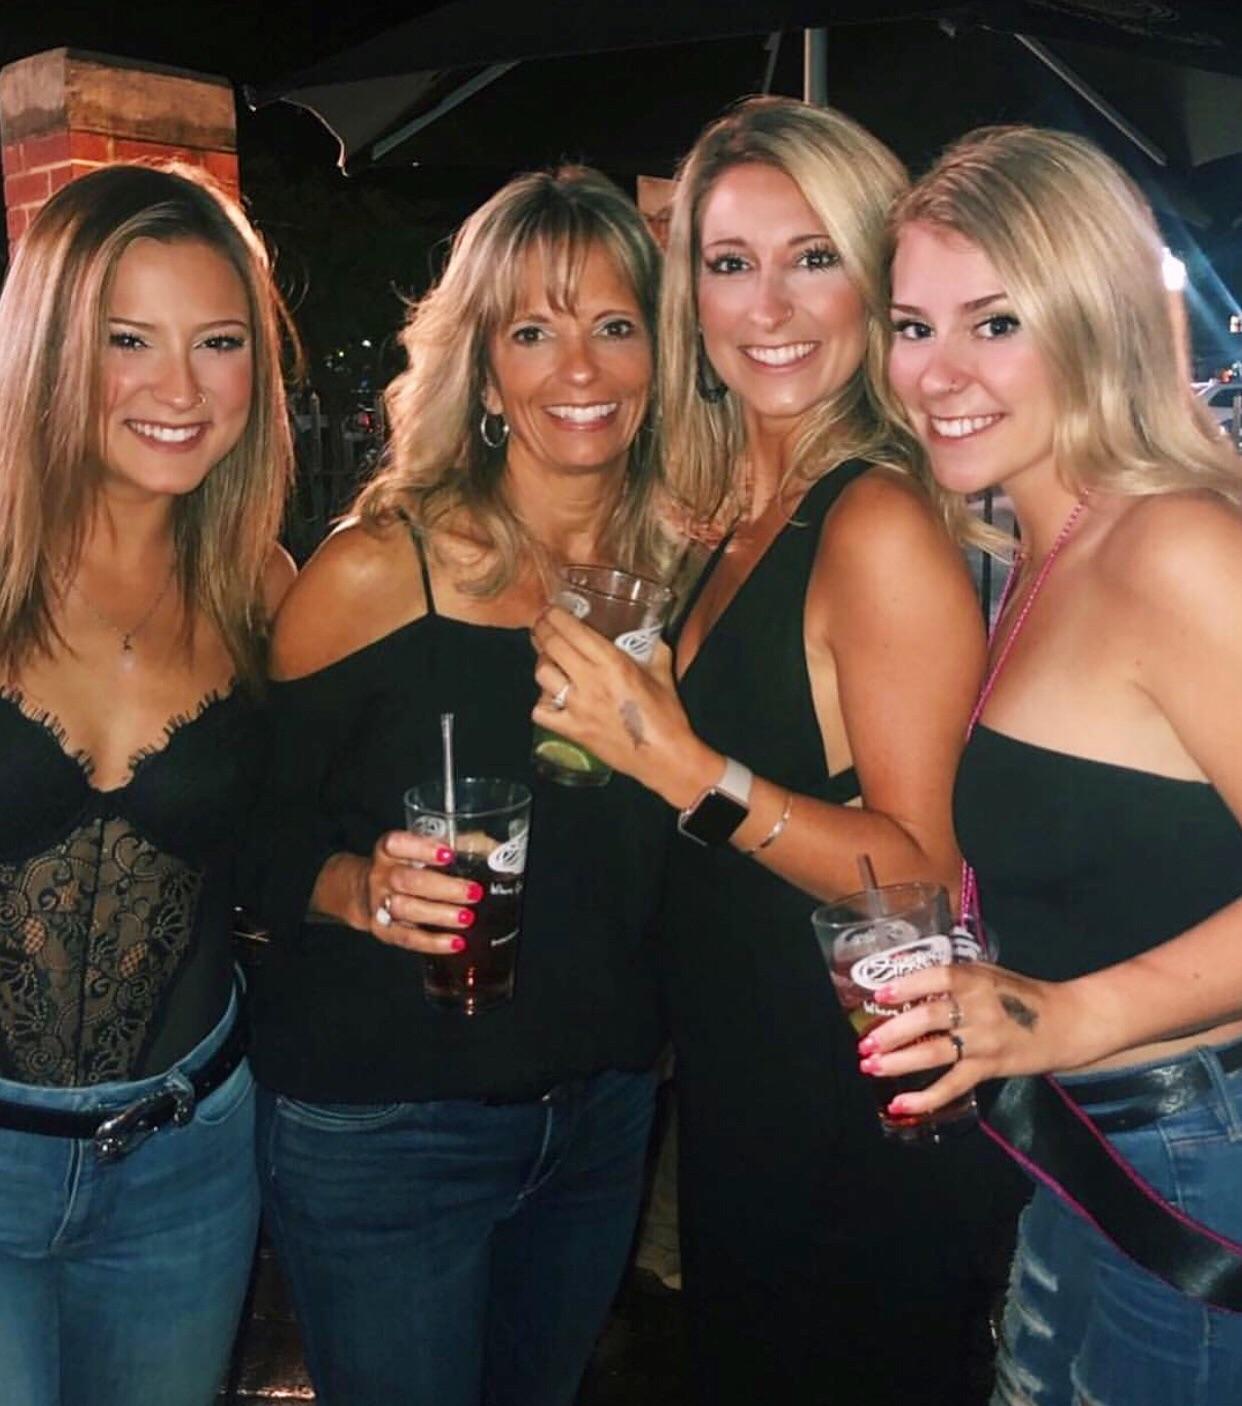 Mom or Daughters?